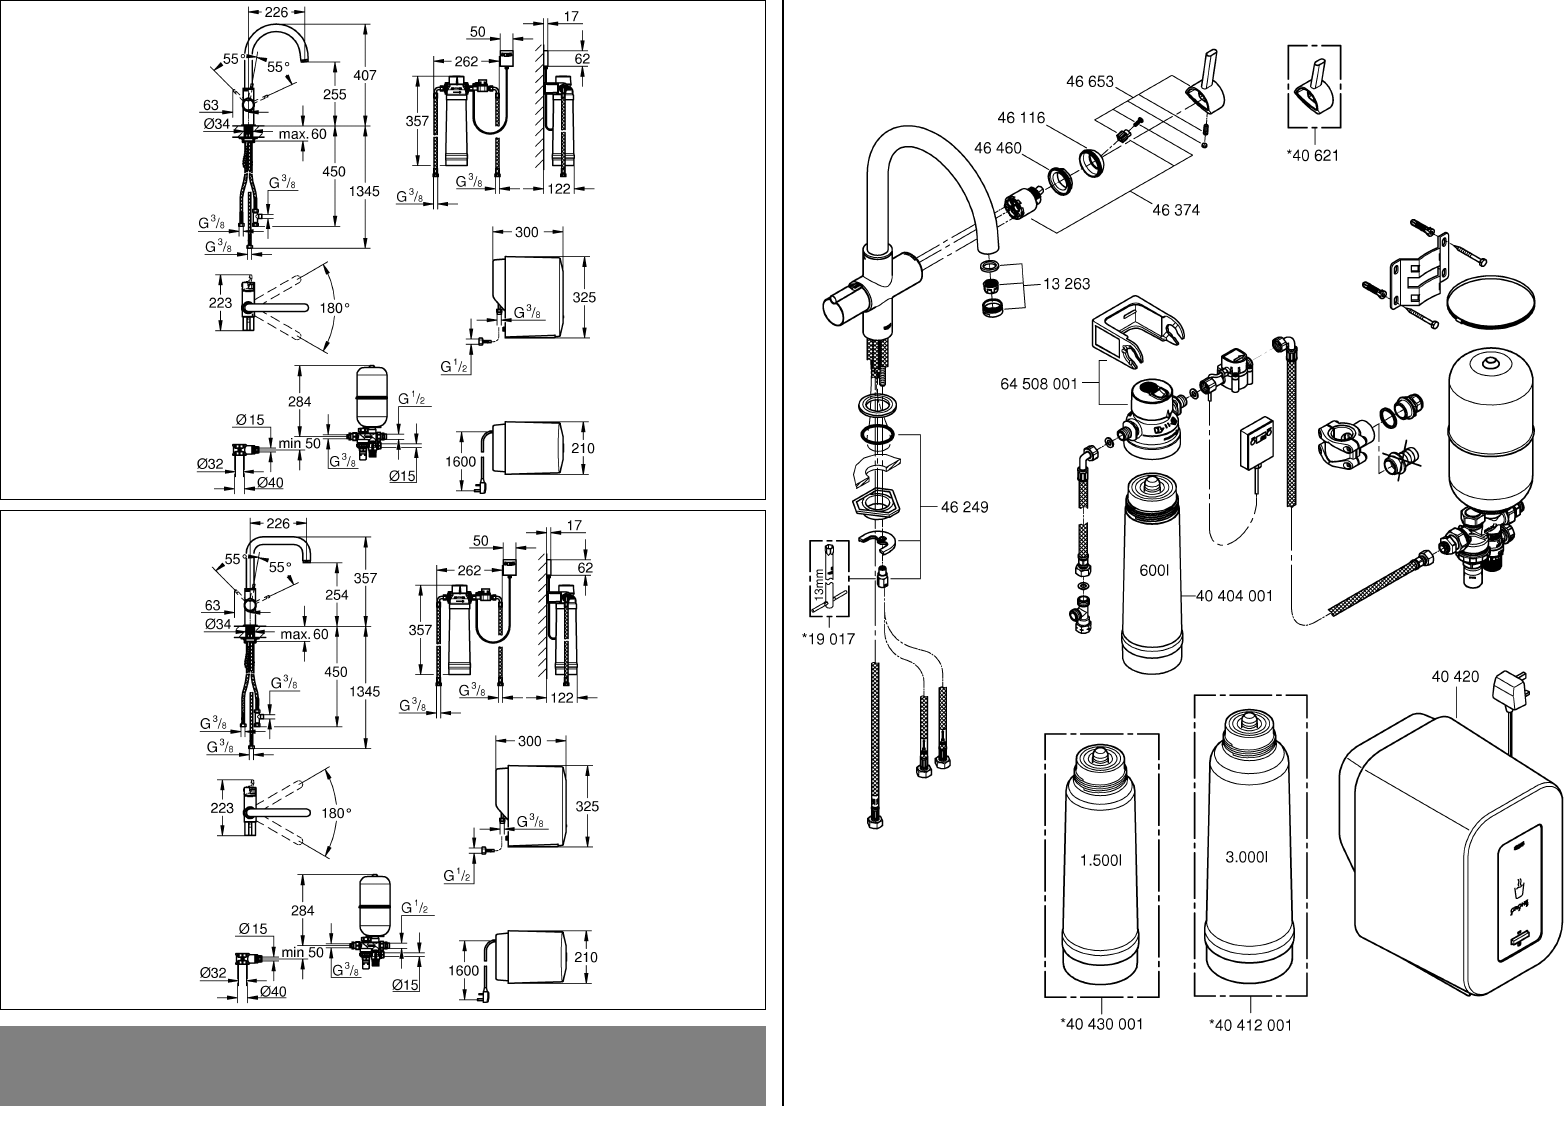 essence residentie Almachtig Manual Grohe Red Duo (page 1 of 12) (English)